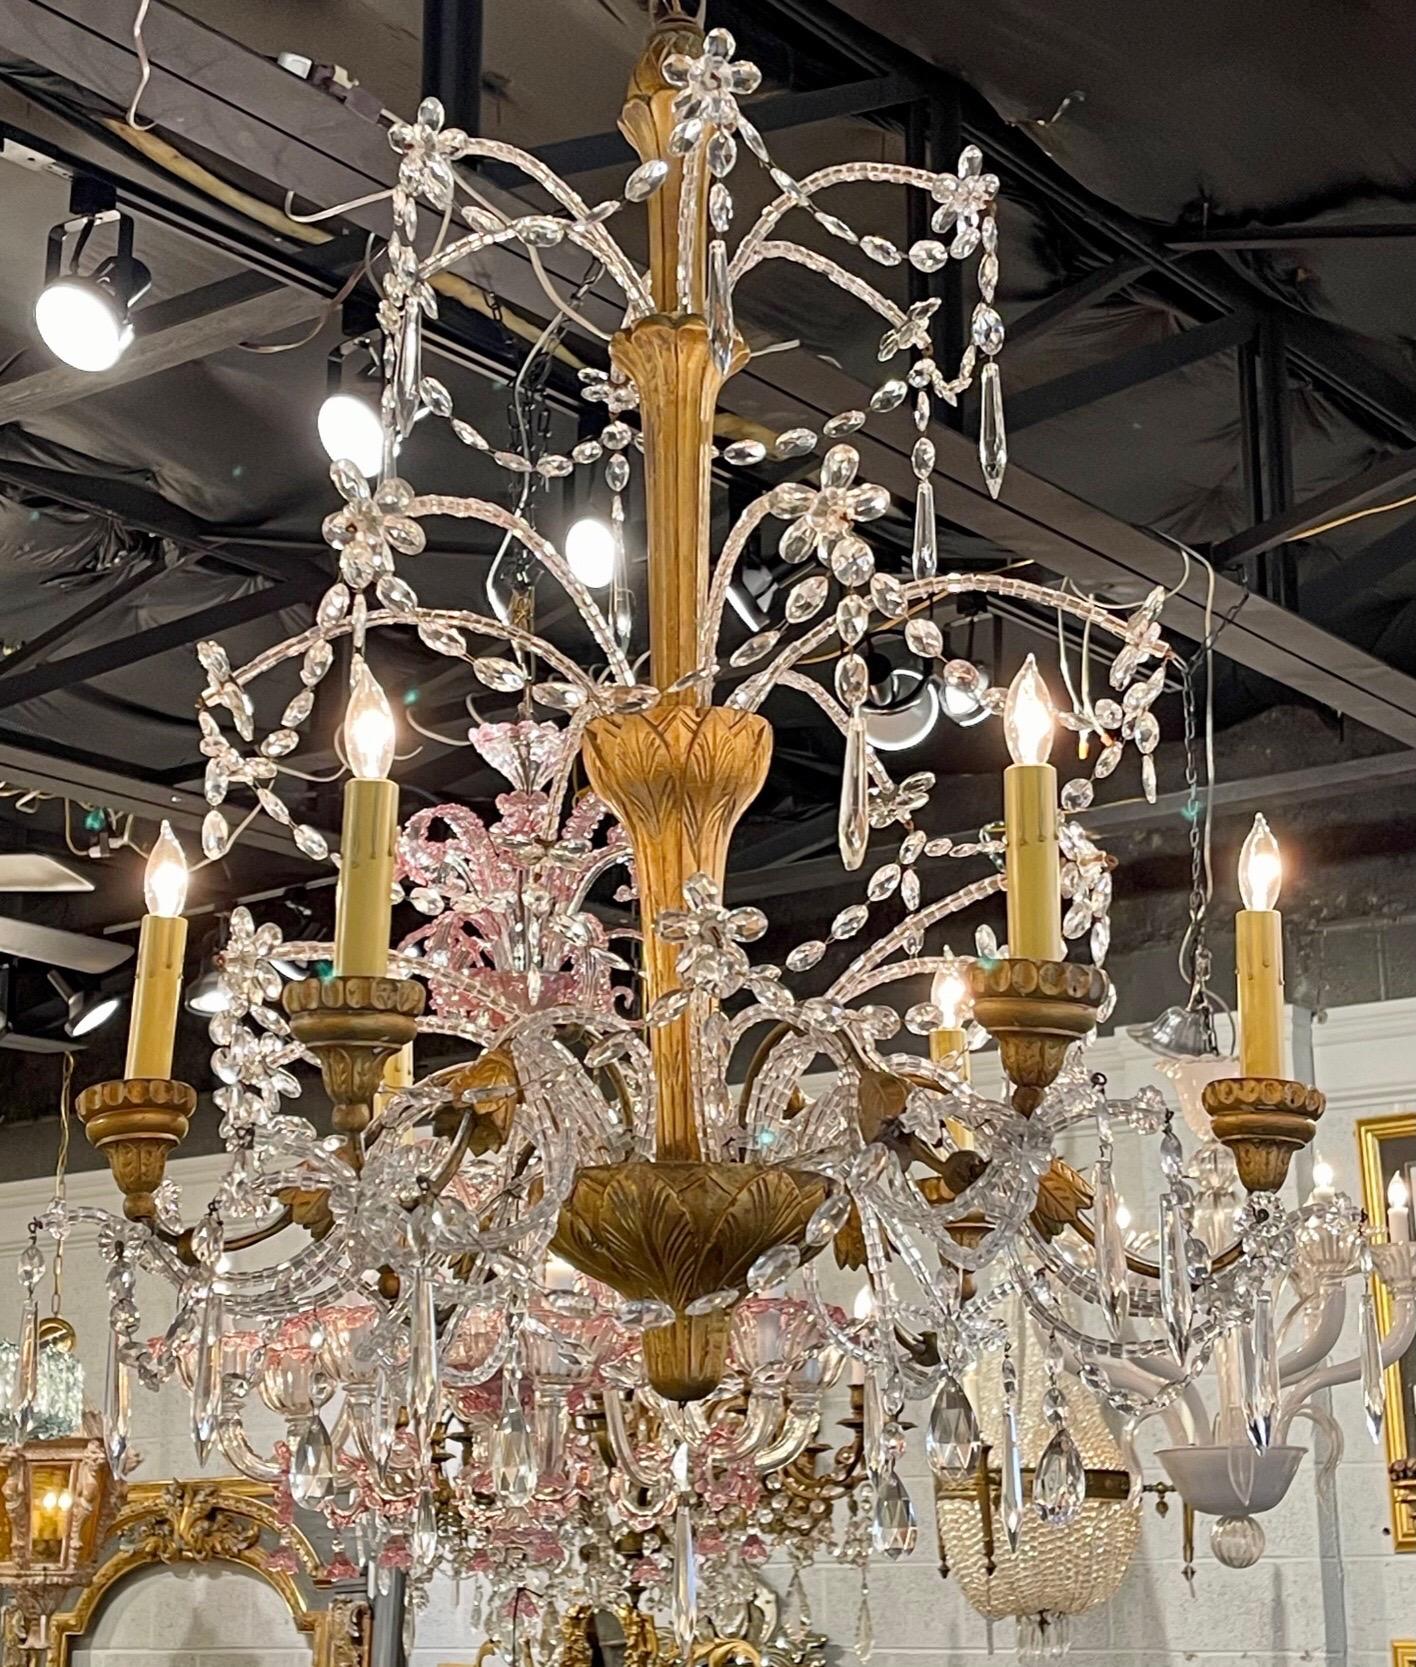 Lovely 19th century Italian beaded crystal and giltwood chandelier with 6-light. Cascading array of beads and crystals on a decorative carved base. Gorgeous!